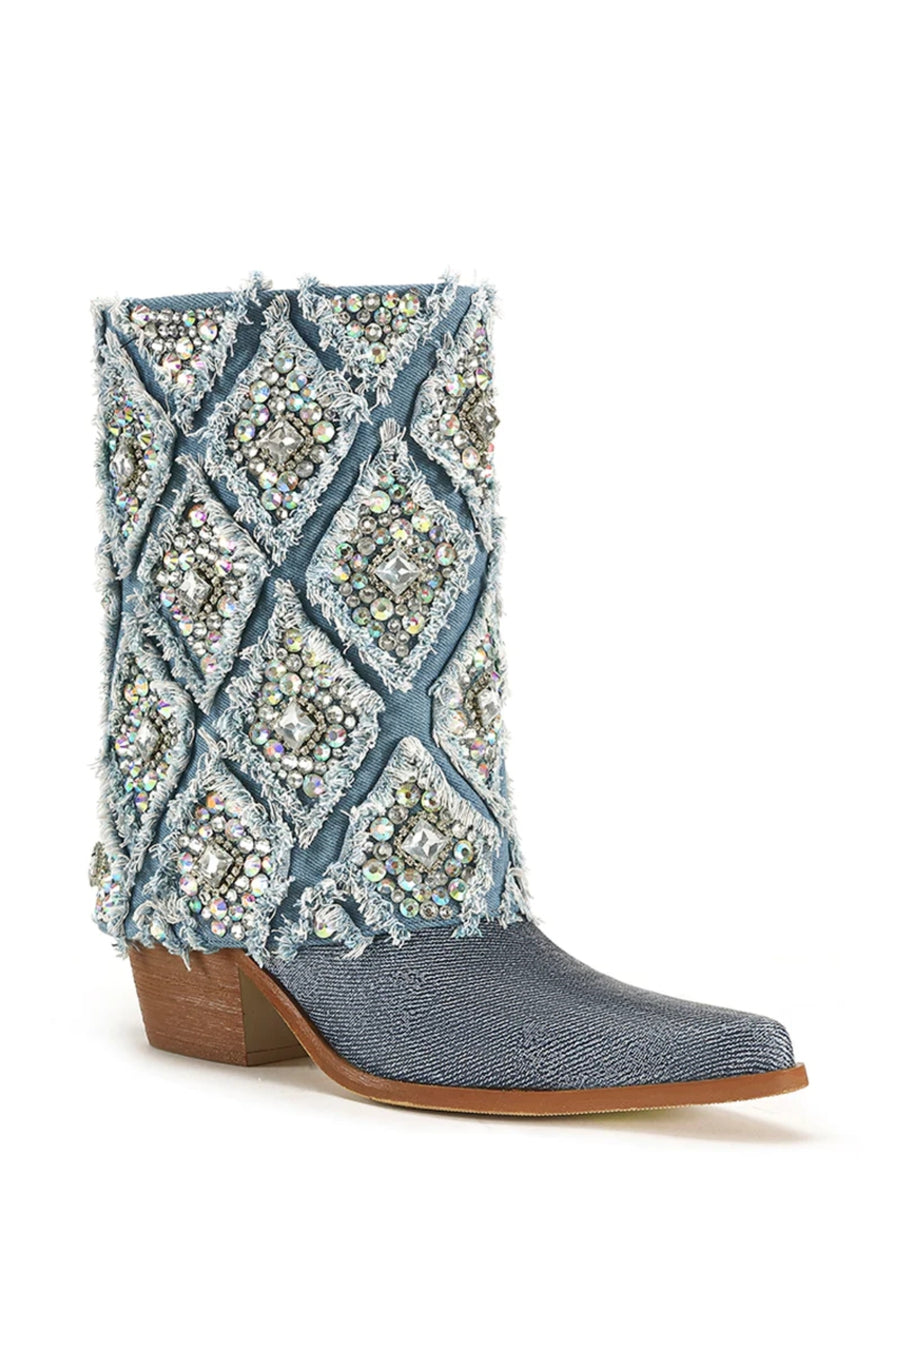 angled view of denim statement western boot with a patterned, rhinestone embellished distressed denim  fold over accent 